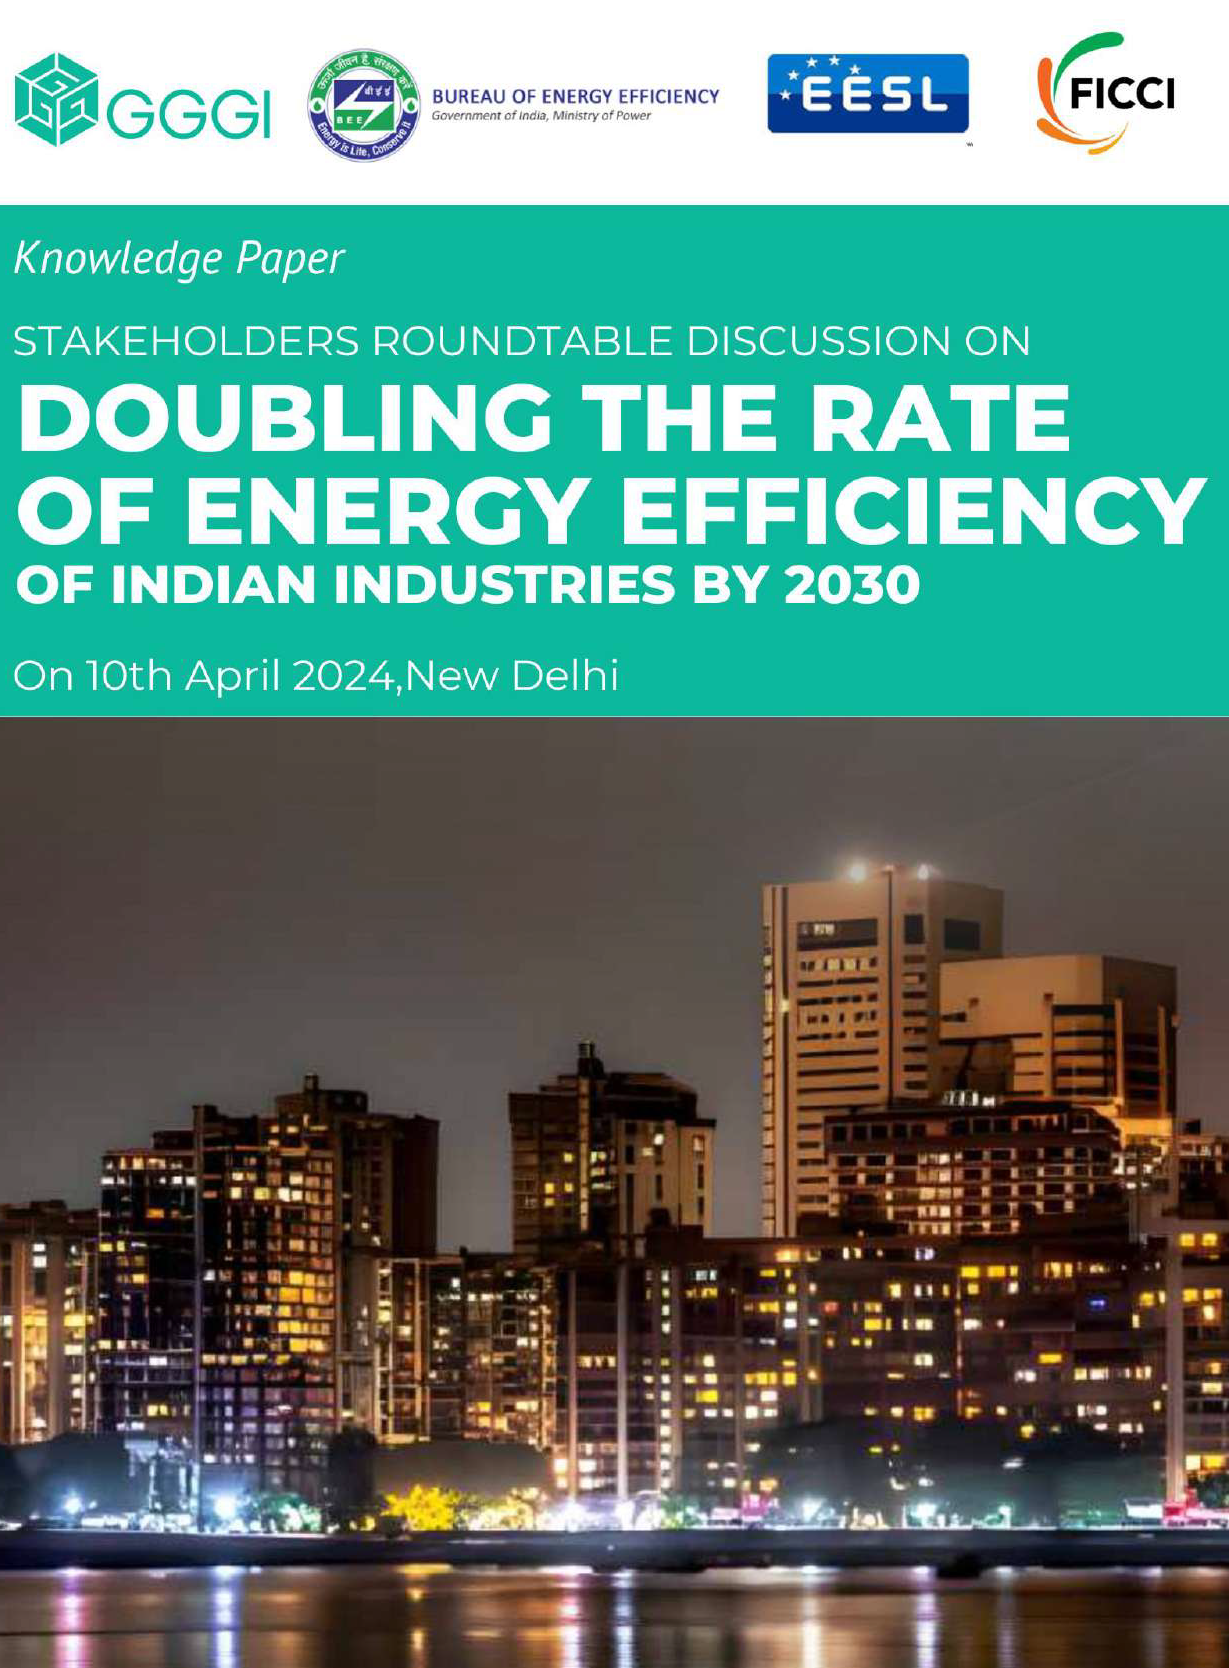 Knowledge Paper on Doubling the Rate of Energy Efficiency of Indian Industry by 2030